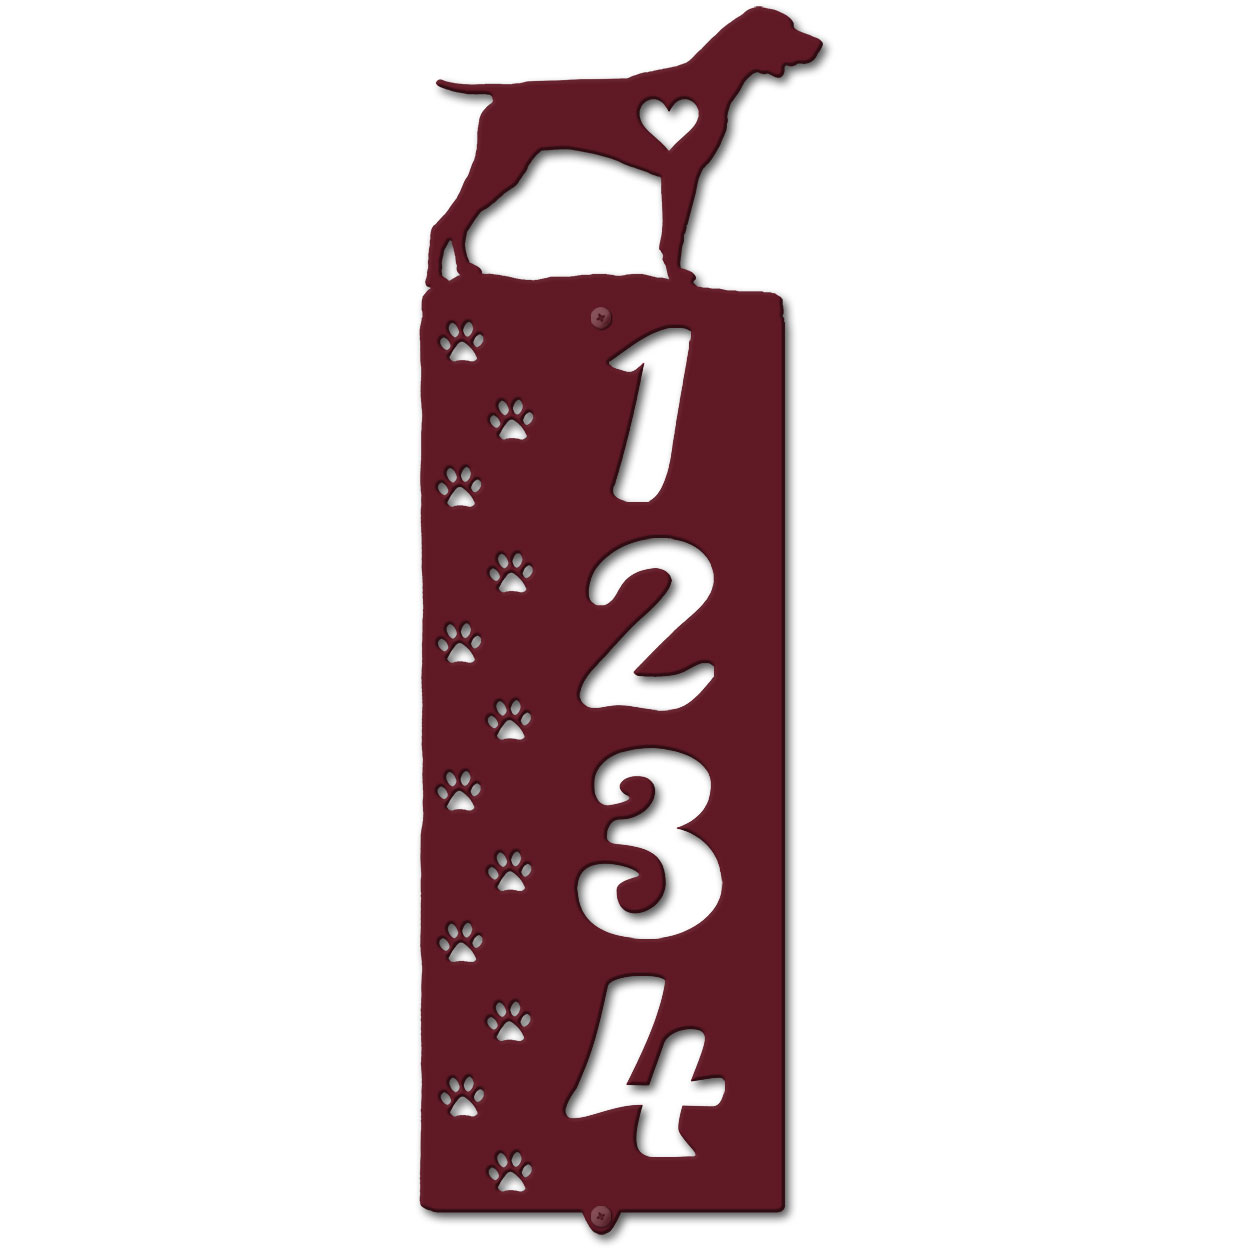 636284 - German Shorthaired Pointer Cut-Outs Four Digit Address Number Plaque - Choose Size and Color